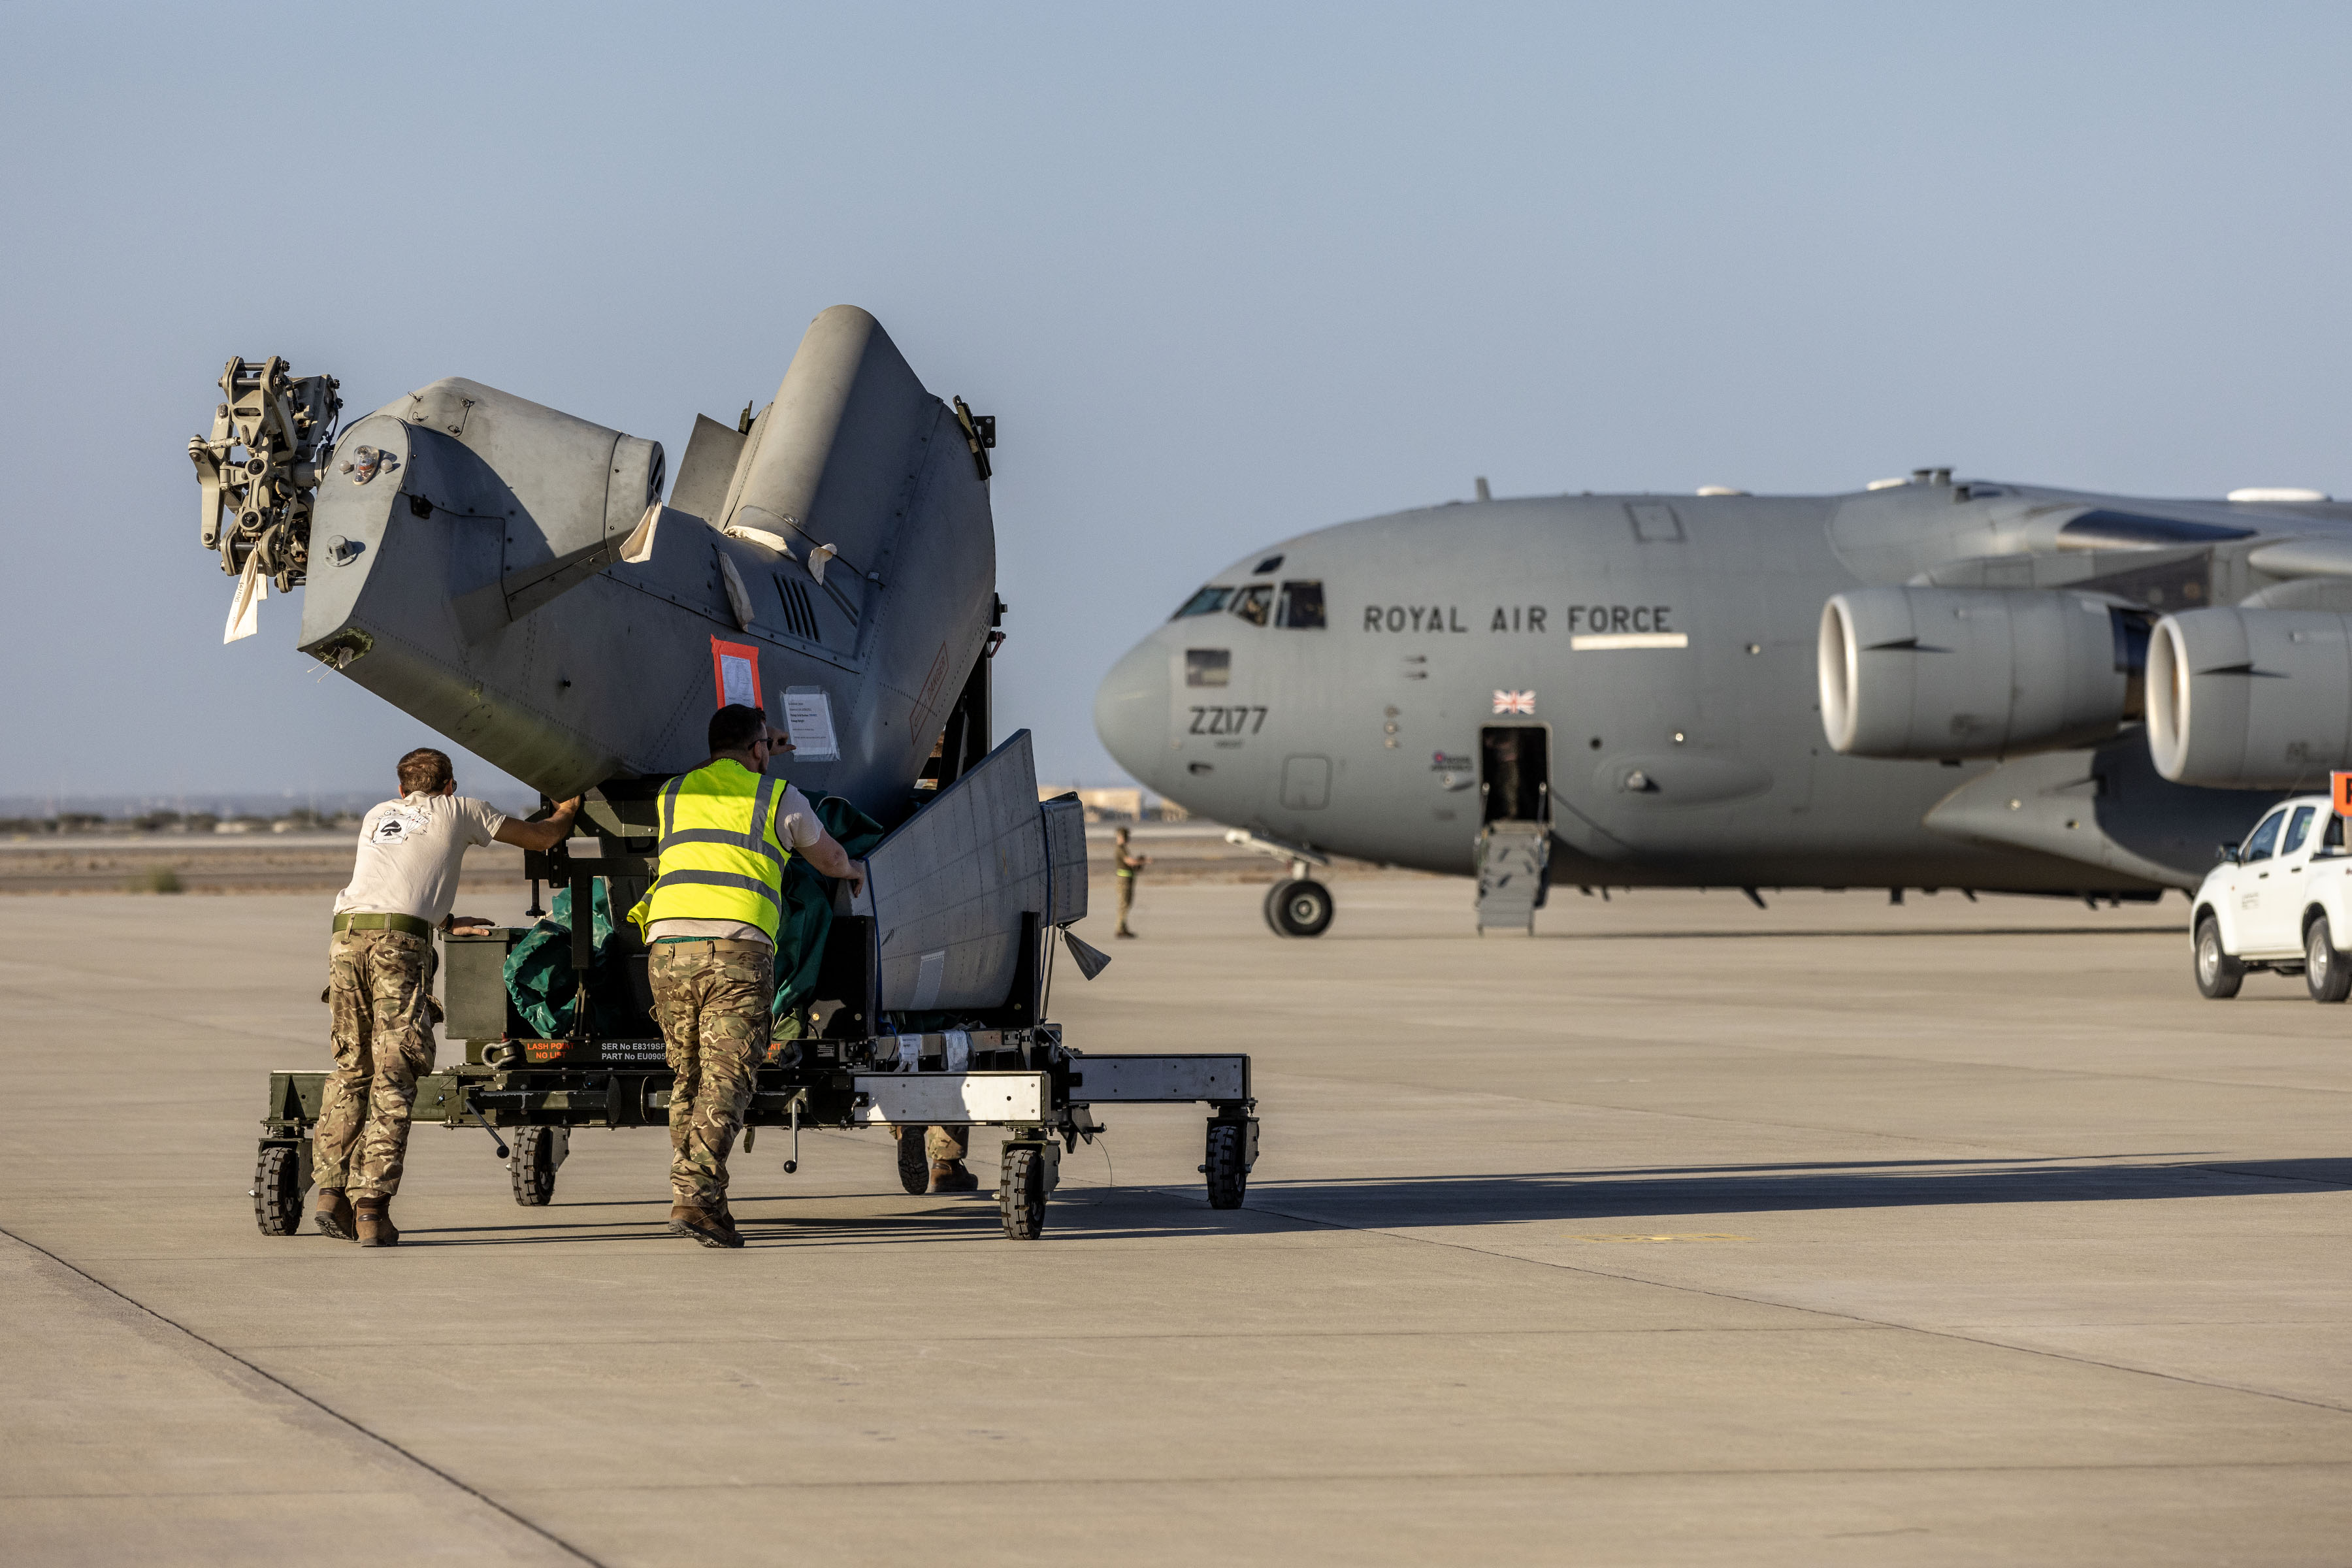 Merlin parts being taken on the runway to the C-17.